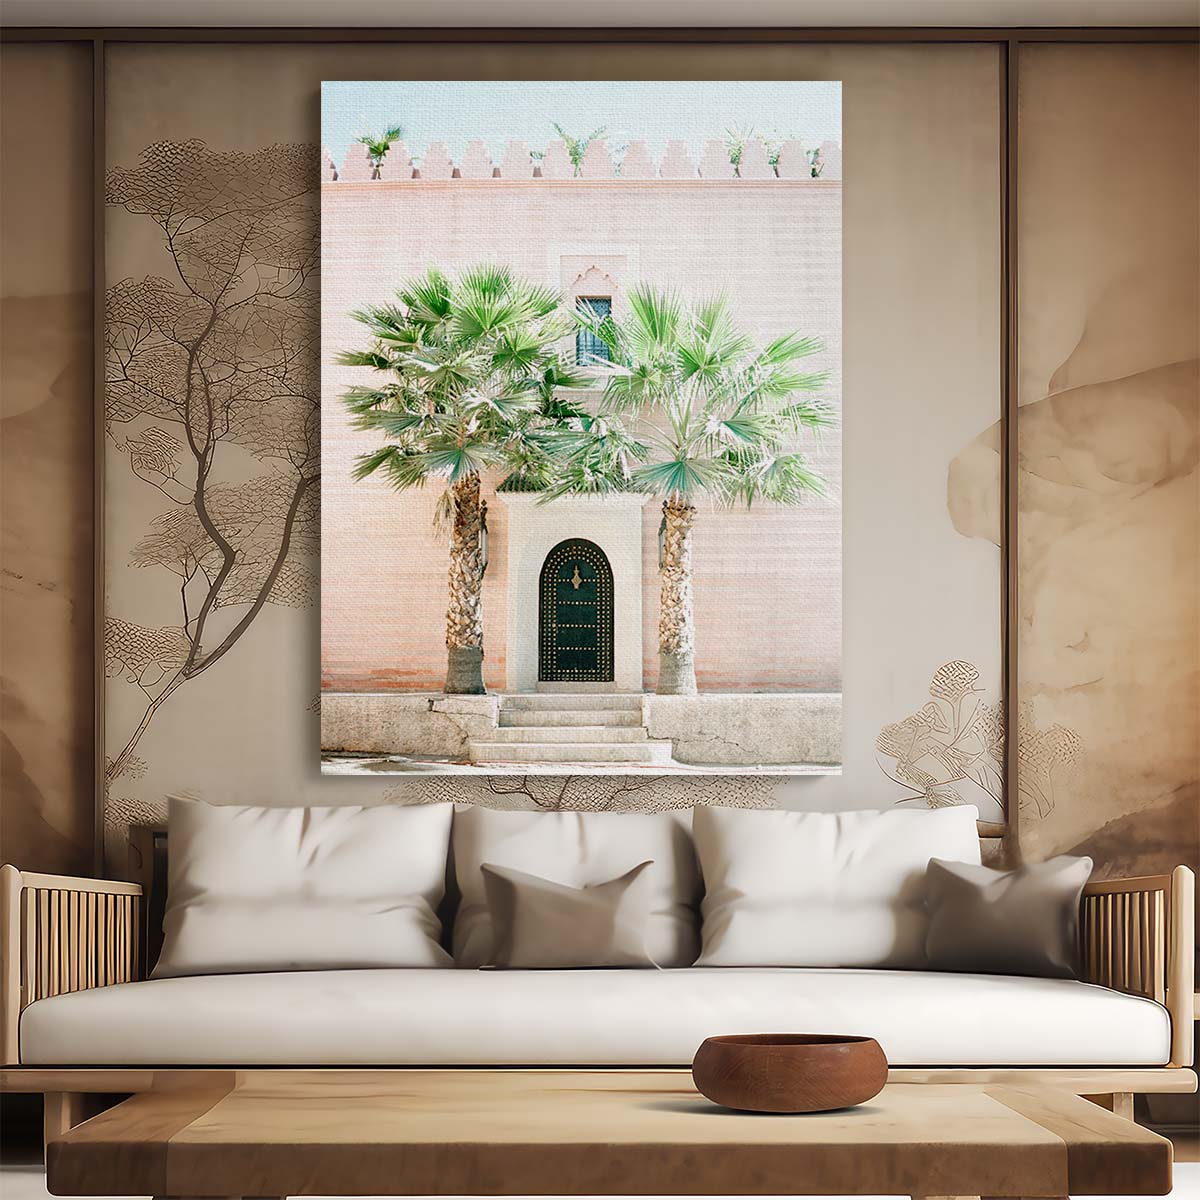 Exotic Marrakesh Architecture Photography Sunny Palm Tree Doorways by Luxuriance Designs, made in USA